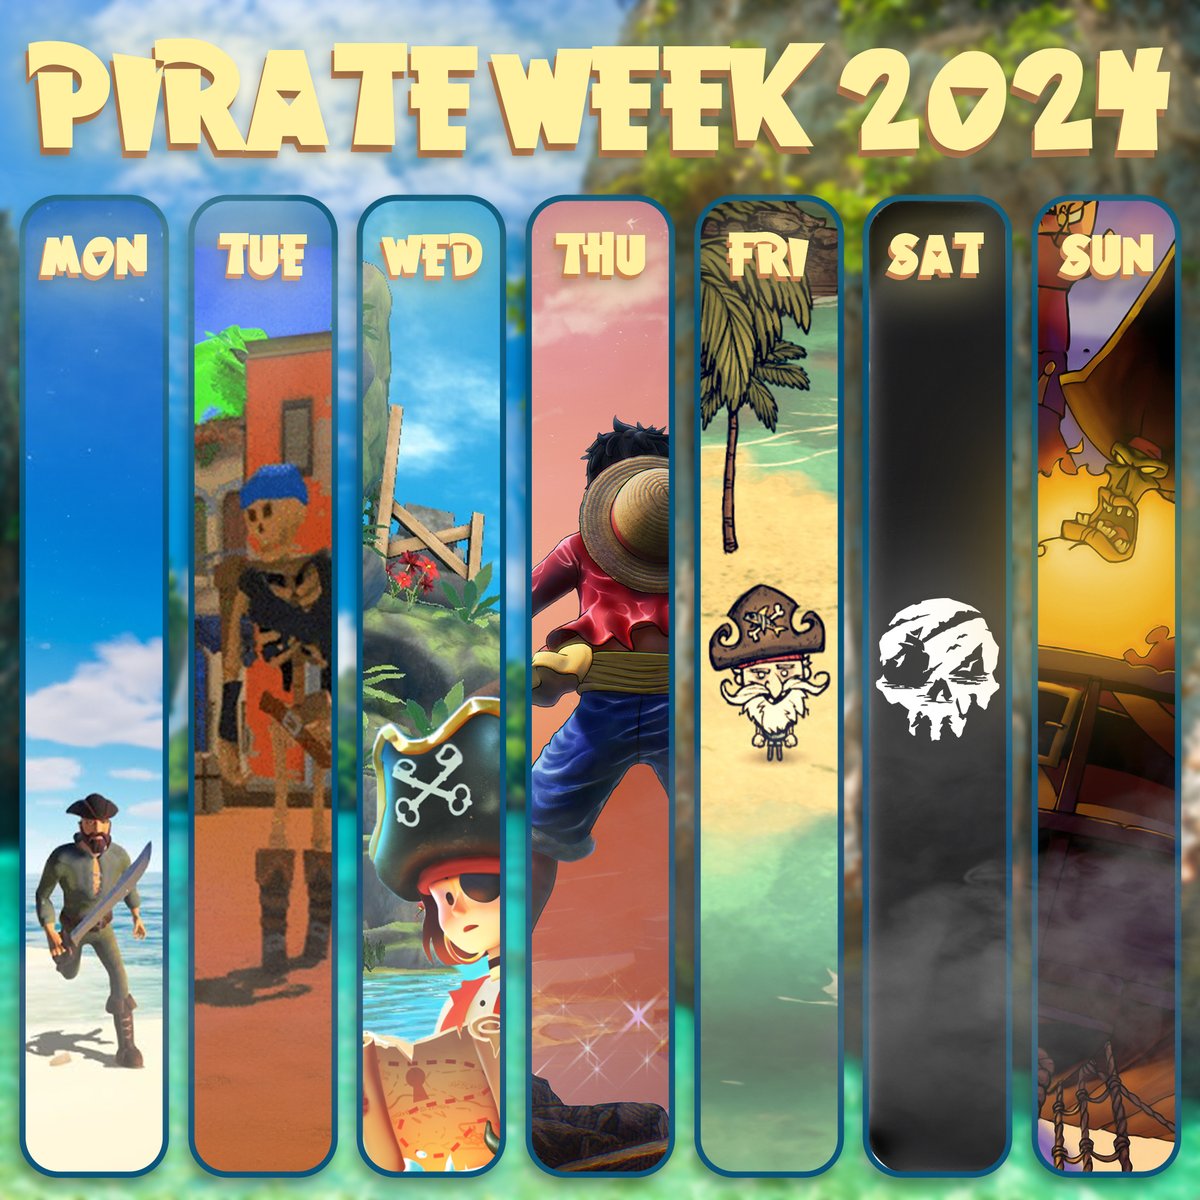 🦜 PIRATE WEEK 2024!!! 🏴‍☠️

Mon: Salt 2: Shores of Gold 🥇
Tues: Sticks & Bones 💀
Wed: Escape Sim Treasure Island VR 🏴‍☠️
Thur: One Piece Odyssey 🥭
Fri: Don't Starve Shipwrecked 🔱
Sat: 12 Hours of Sea of Thieves S12 ⚔
Sun: Curse of Monkey Island Drinking game 🍻